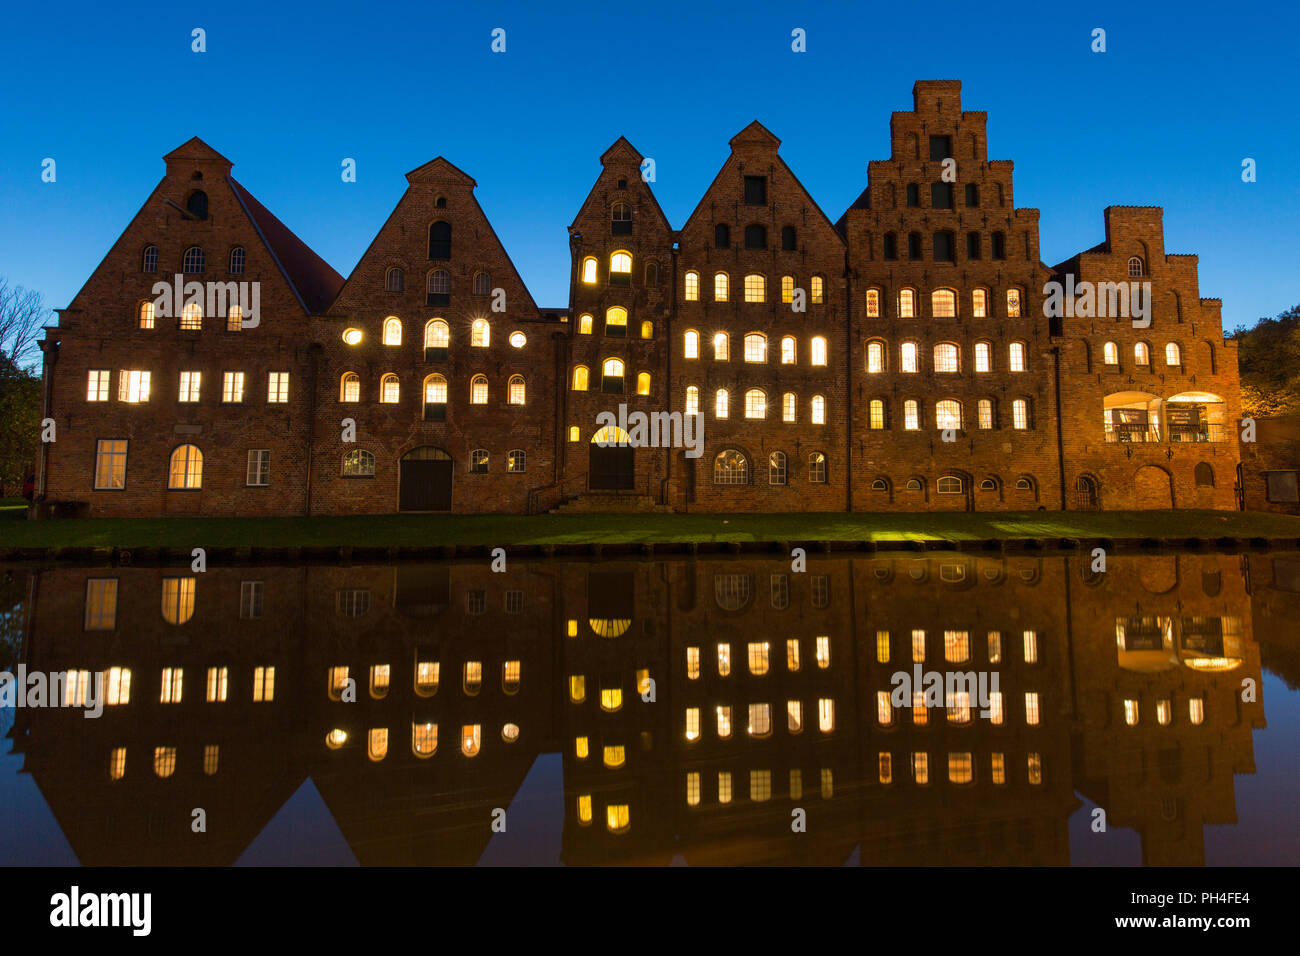 Historic salt storehouses (Salzspeicher) on the river Trave in Luebeck, Schleswig-Holstein, Germany at night Stock Photo